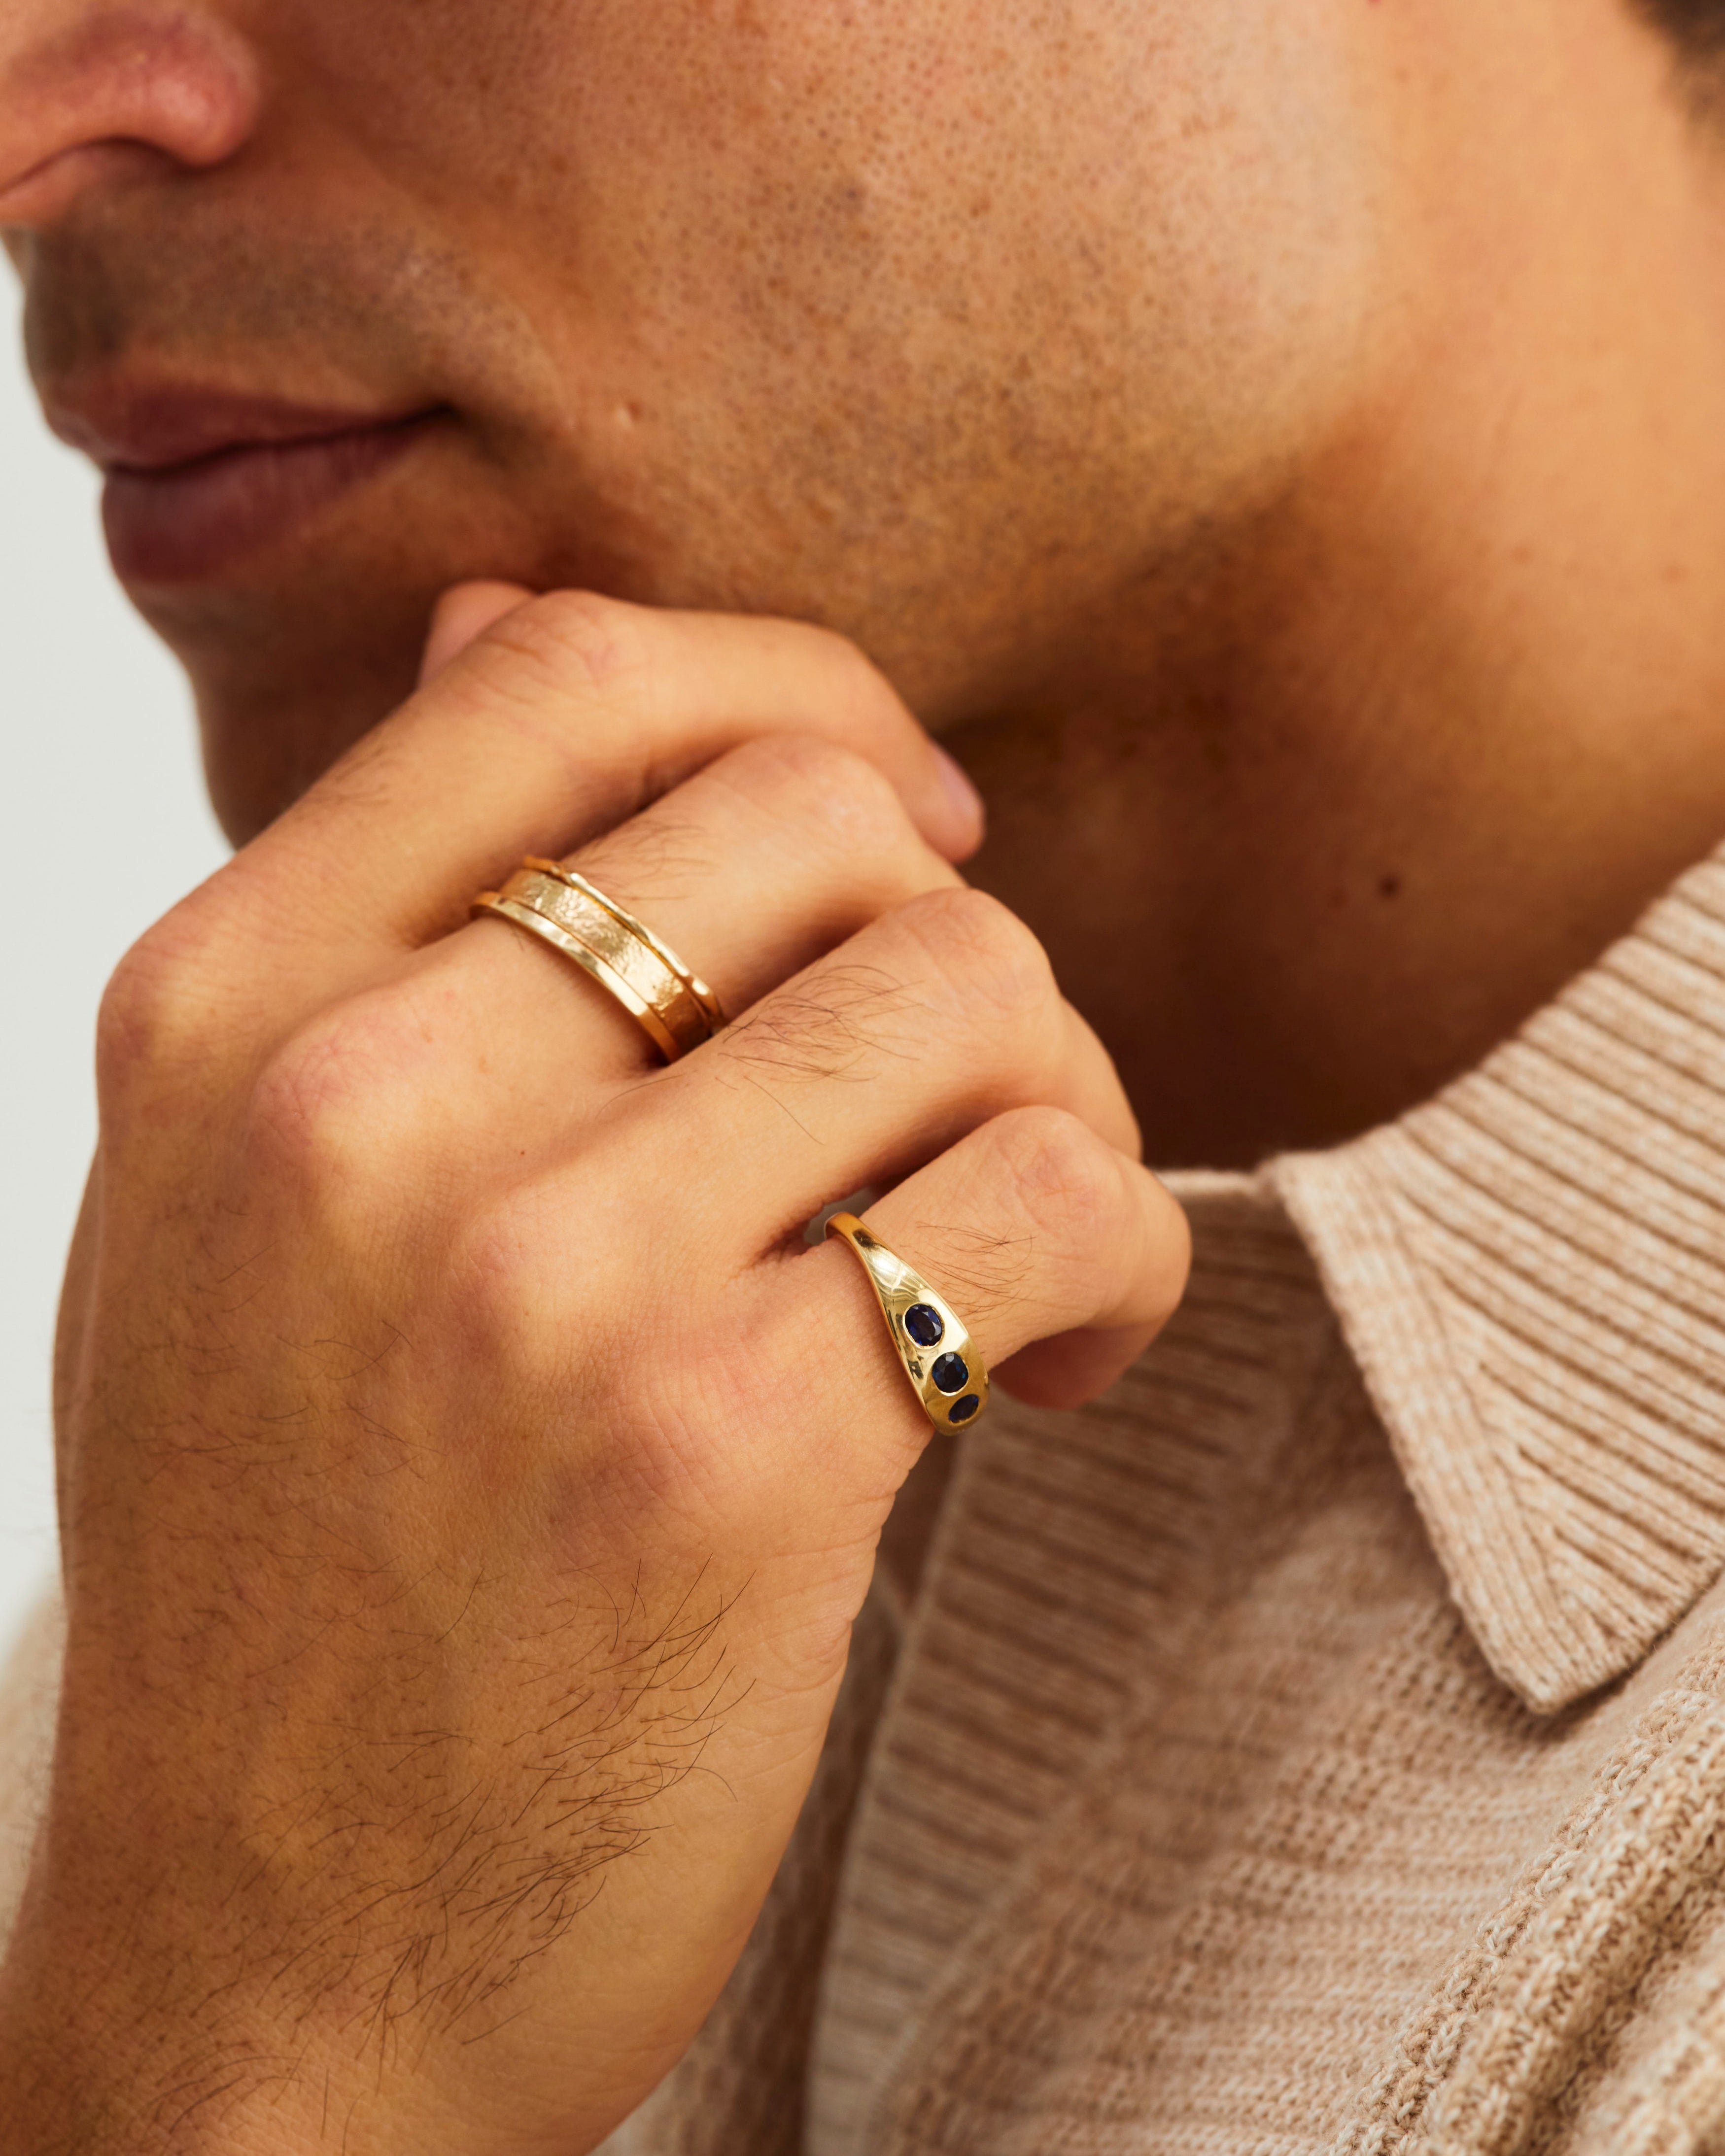 A man wears our Seule Trinity Ring with dark blue sapphires, and gold stacking rings